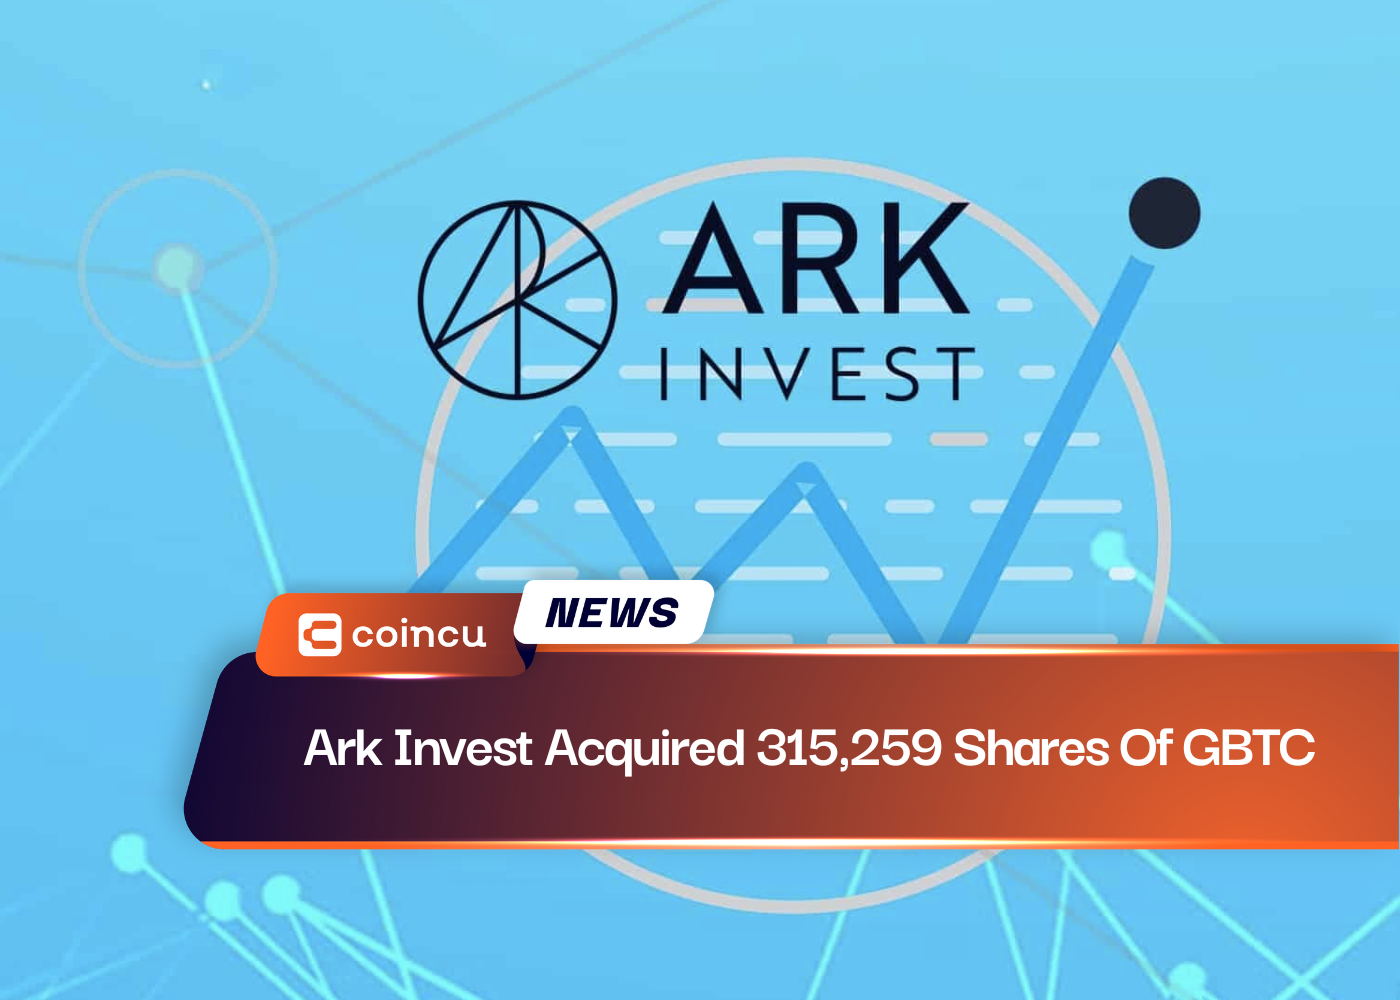 Ark Invest Acquired 315,259 Shares Of GBTC